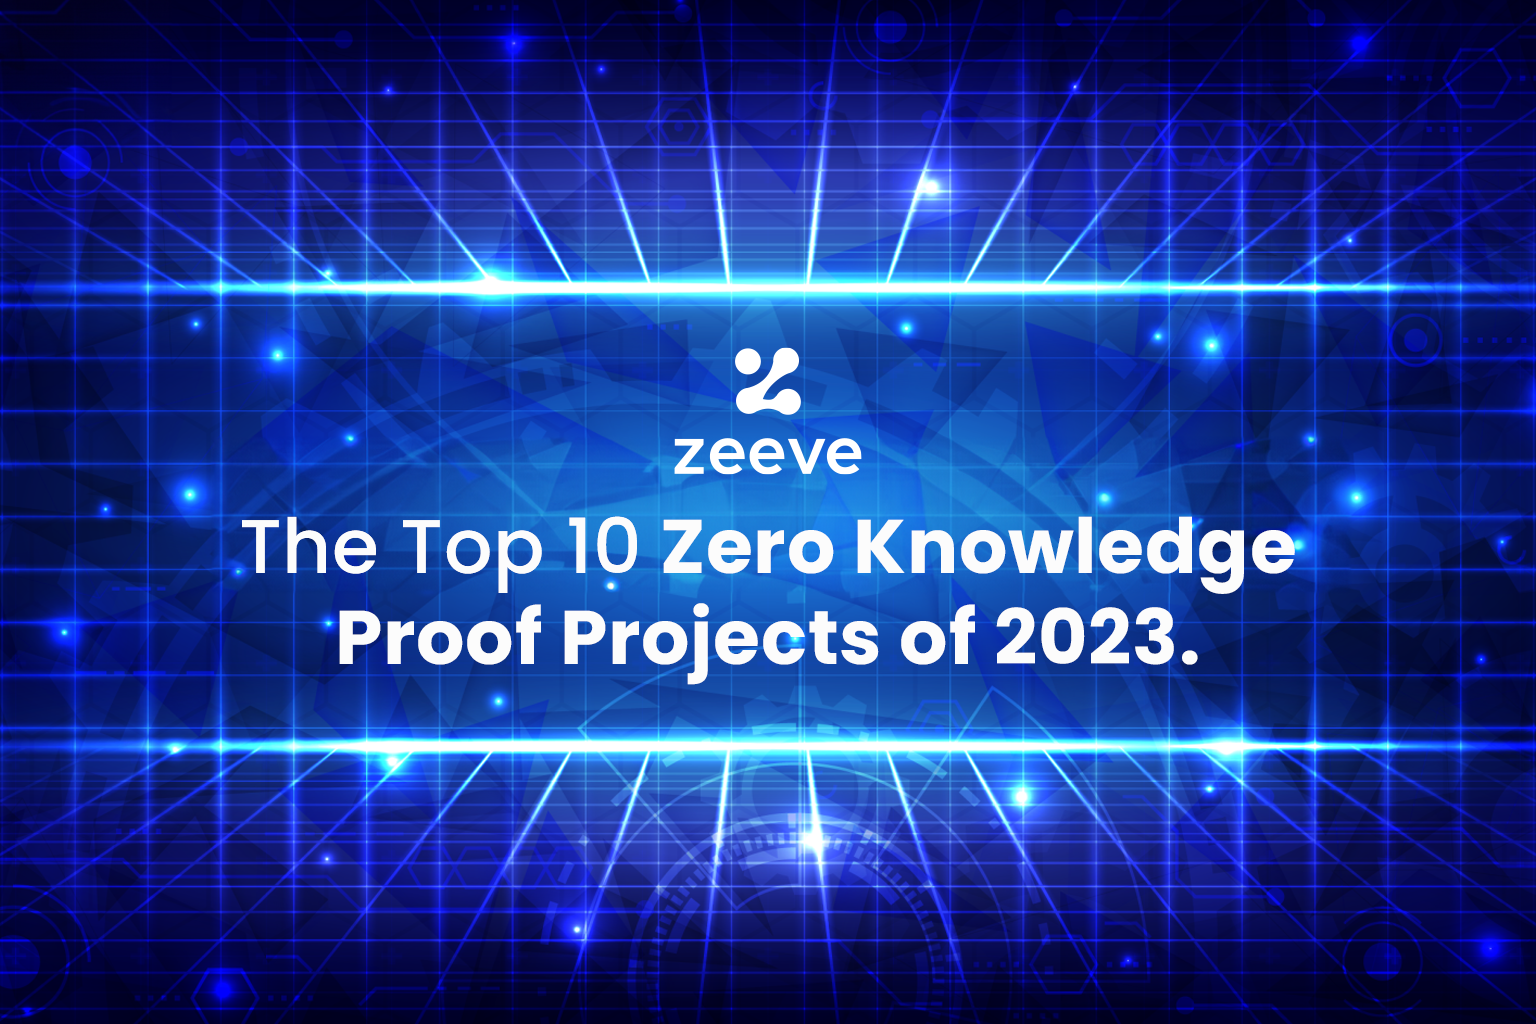 Zero Knowledge Proof projects for 2023